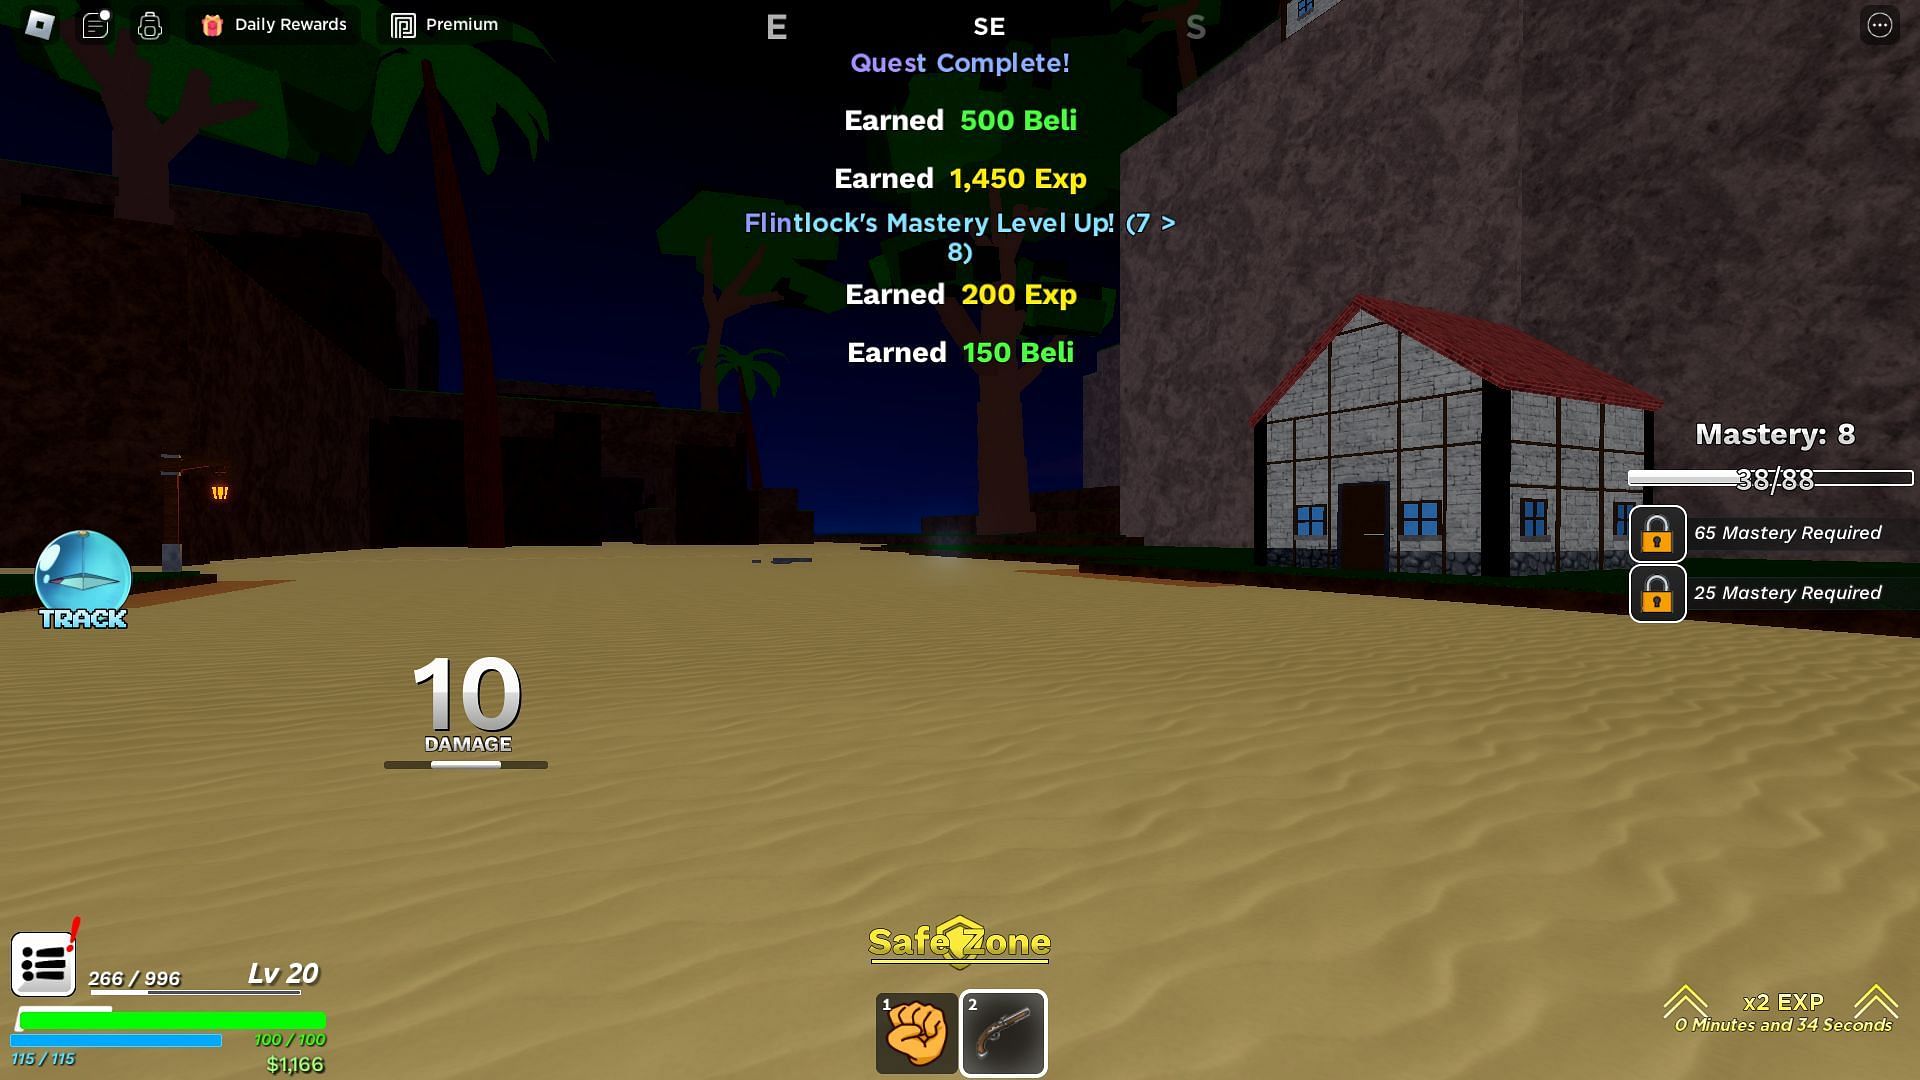 XP earned upon quest completion (Image via Roblox)